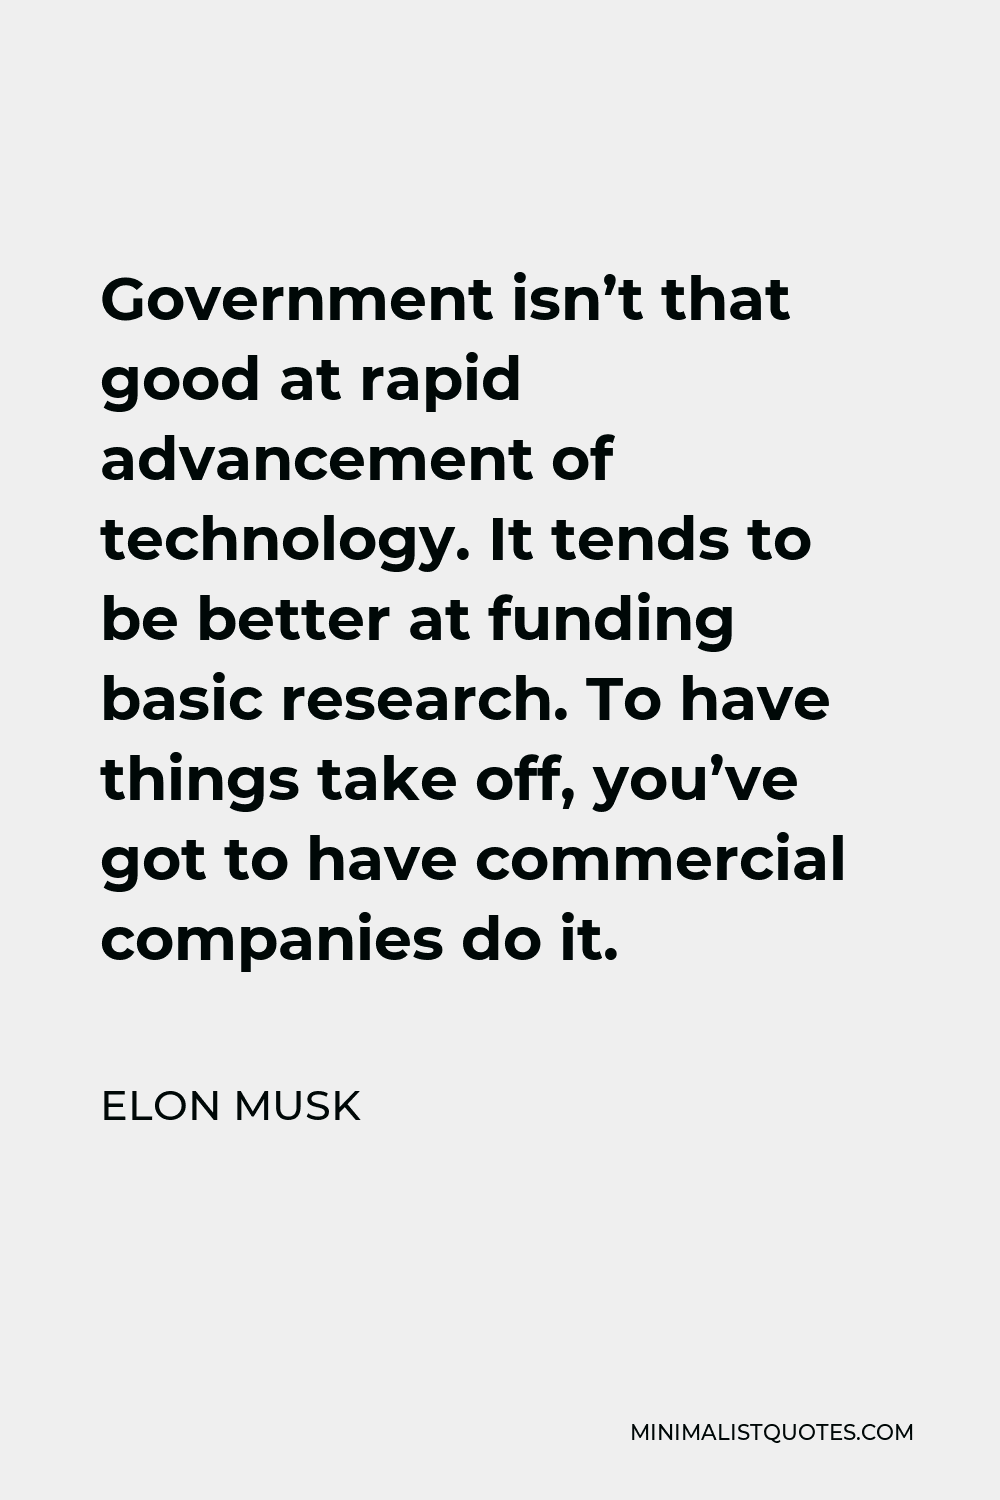 Elon Musk Quote - Government isn’t that good at rapid advancement of technology. It tends to be better at funding basic research. To have things take off, you’ve got to have commercial companies do it.